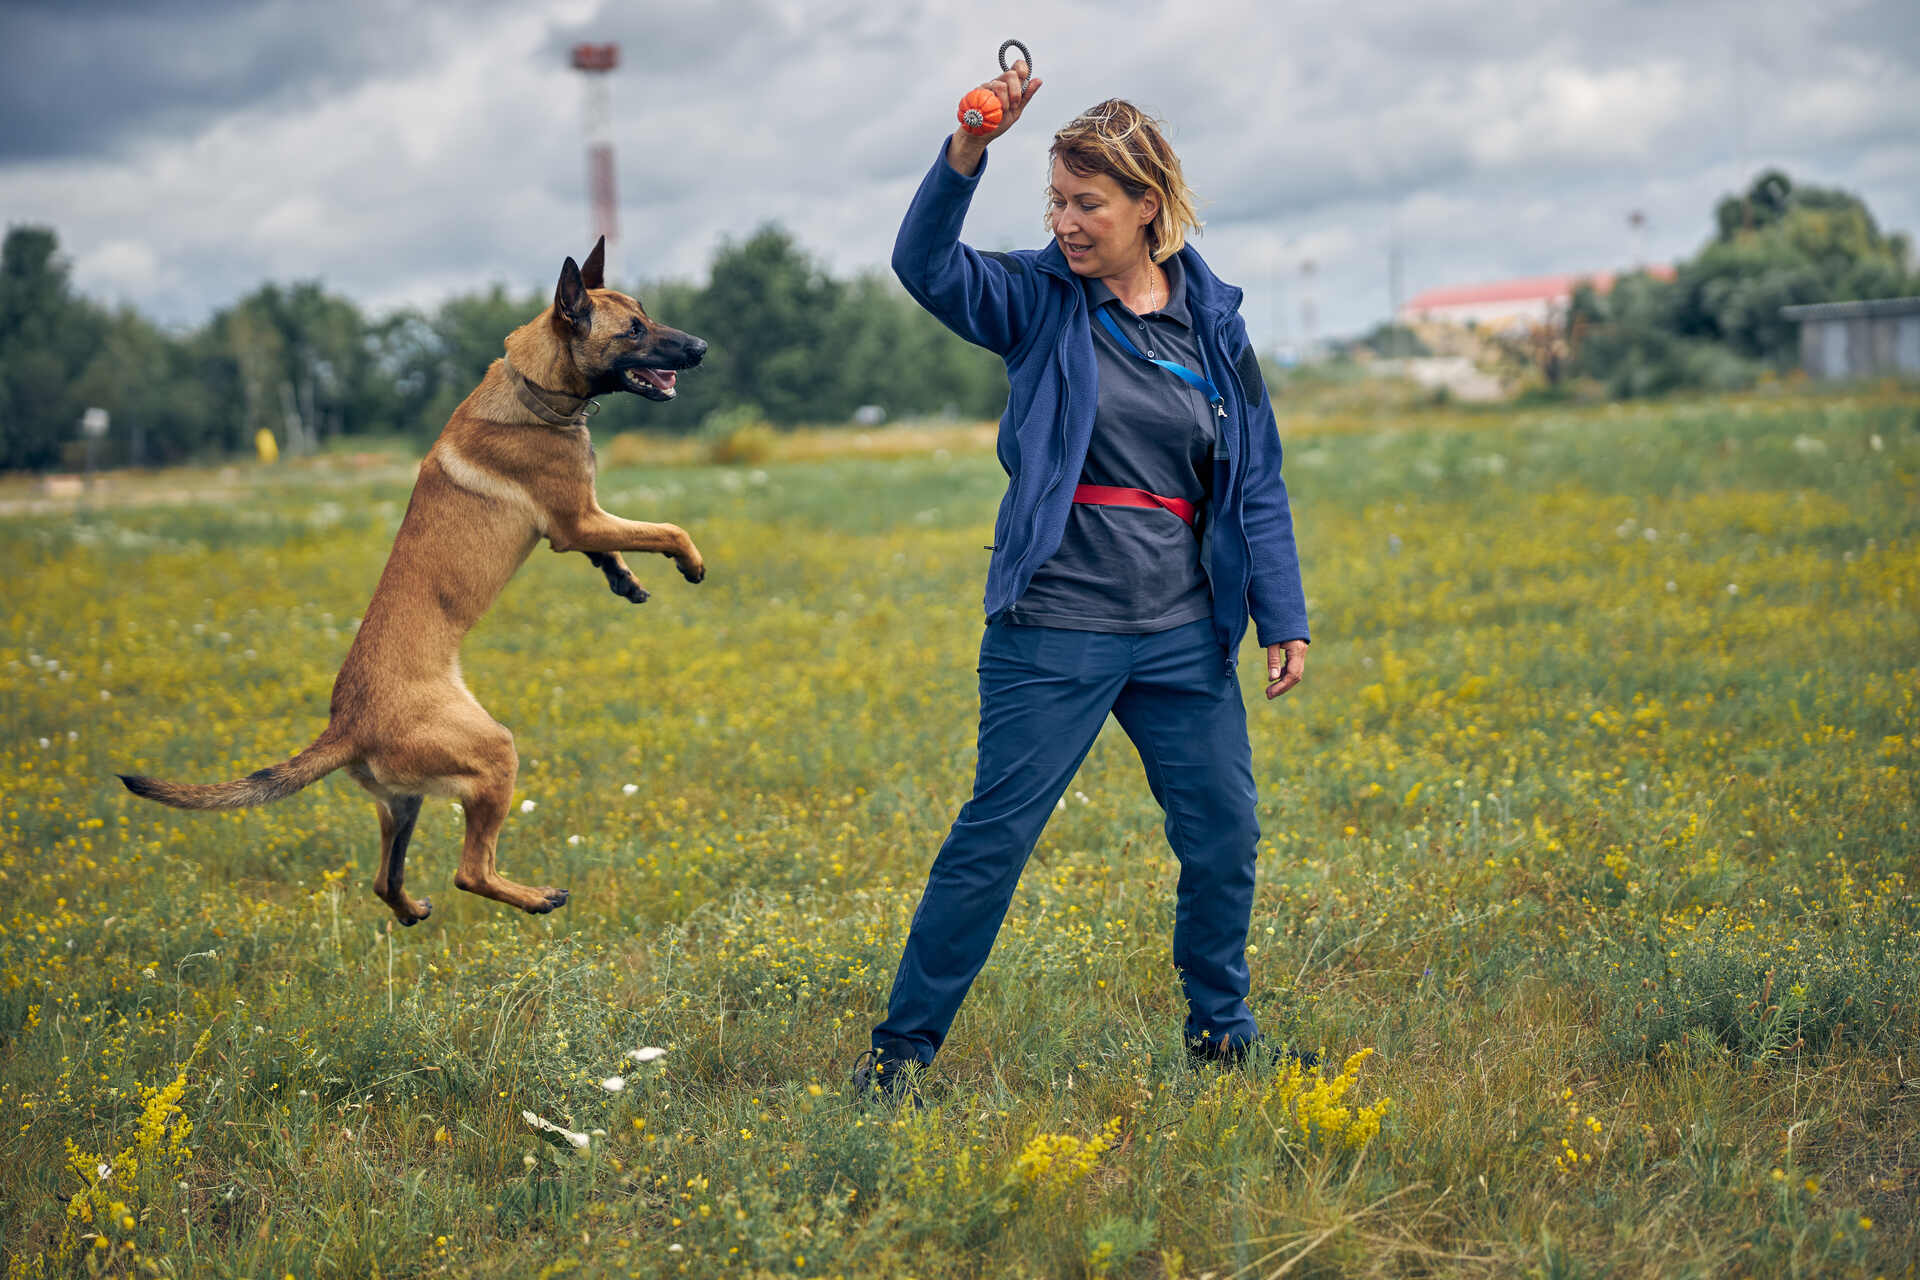 A woman training a dog in a field